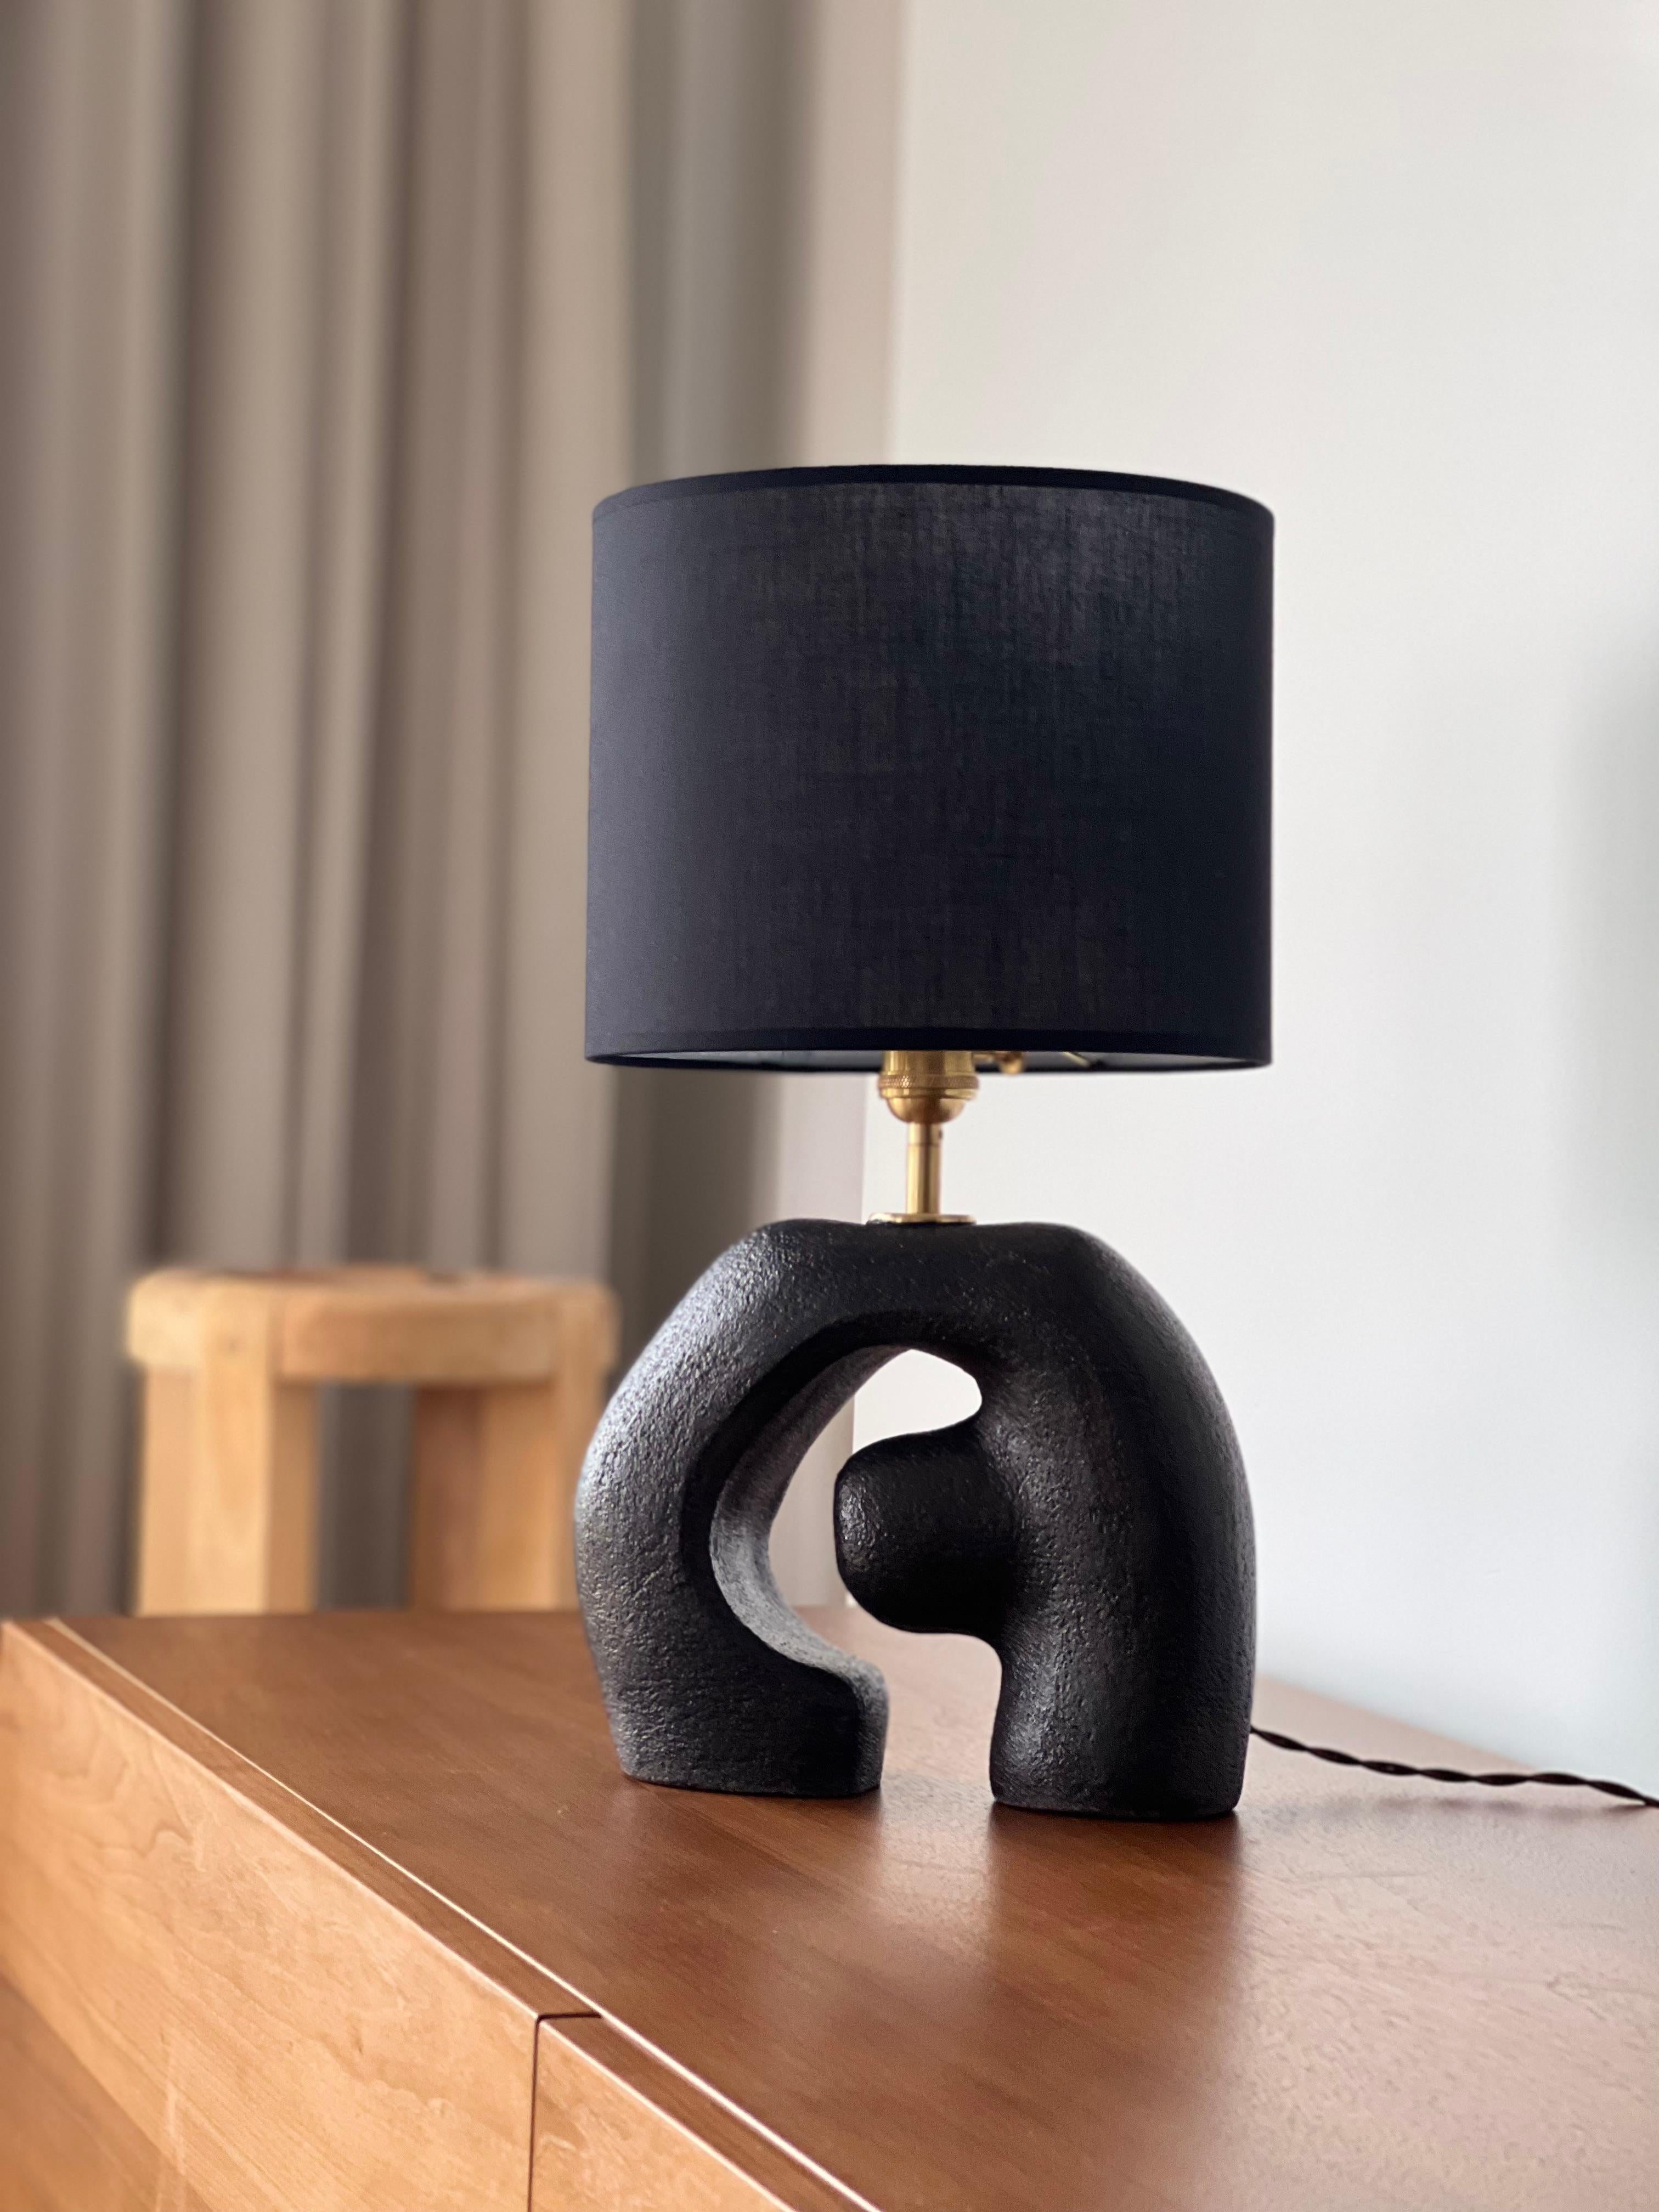 Gigi Black Lampshade by Güler Elçi
Dimensions: W 25.4 x D 12.7 x H 47 cm.
Materials: Stoneware Ceramic, Linen, Unfinished Brass.

Güler Elçi is a ceramic artist based in Istanbul. In the light of her engineering career, she considers ceramics as a